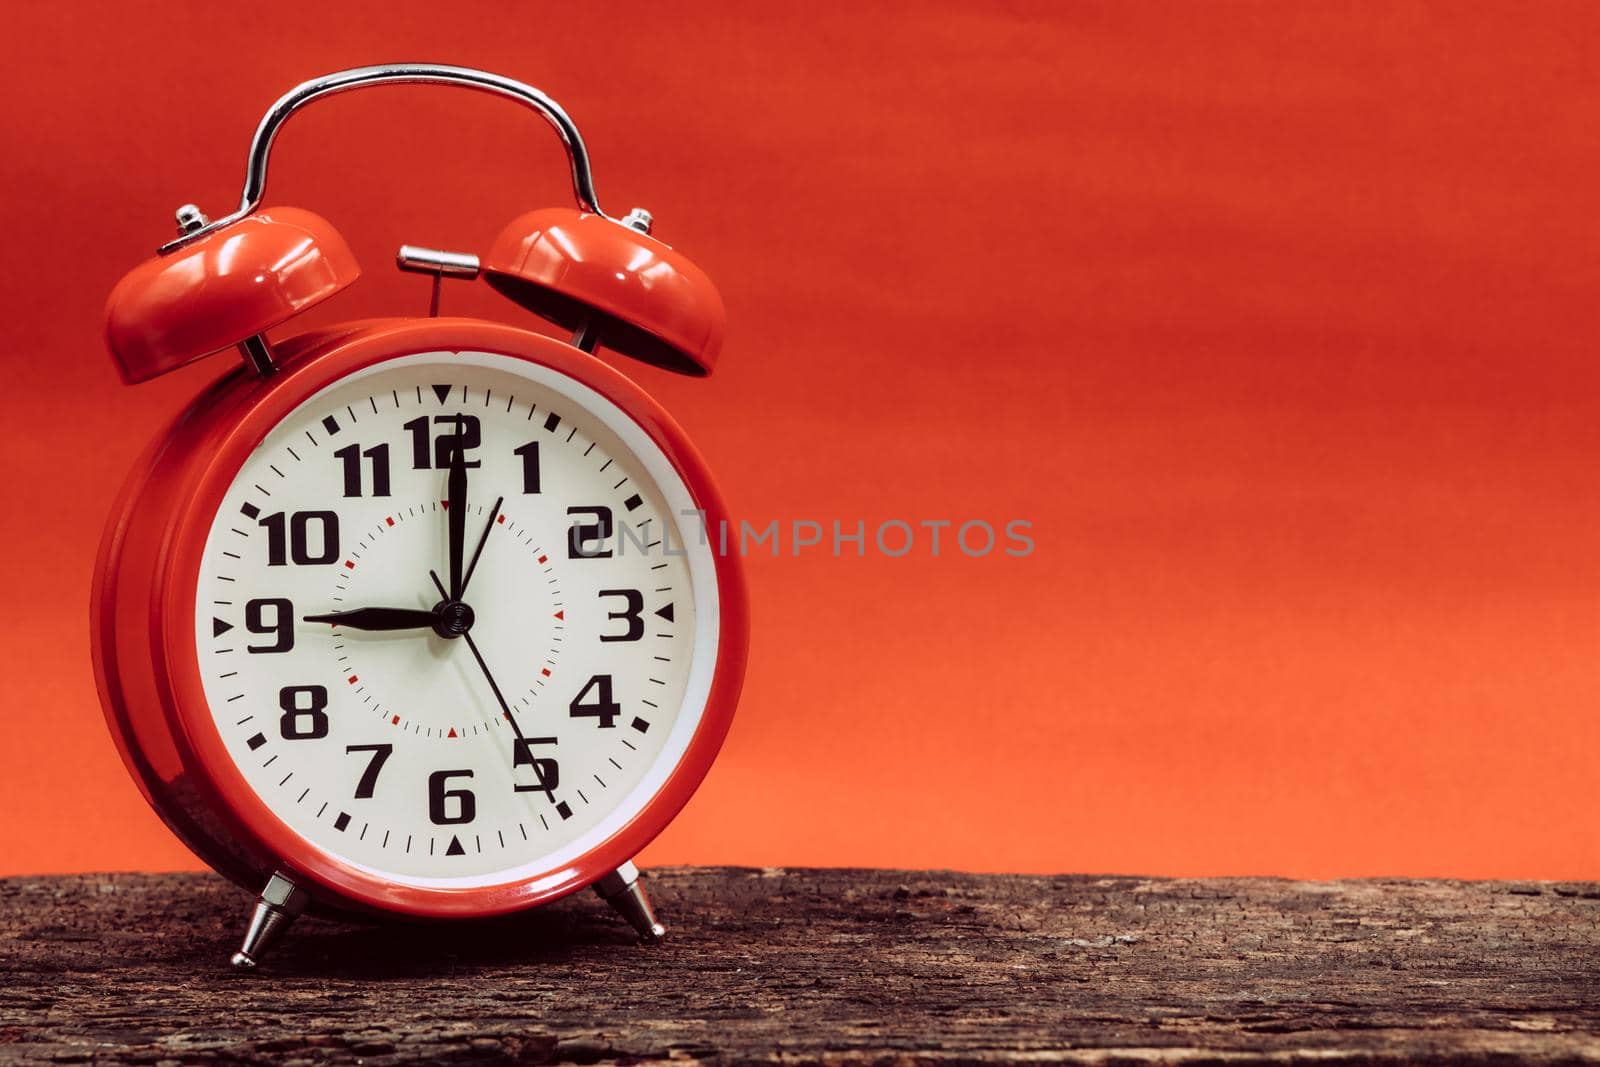 9 o'clock retro clock on wooden with red sun dusk dawn day sky background.